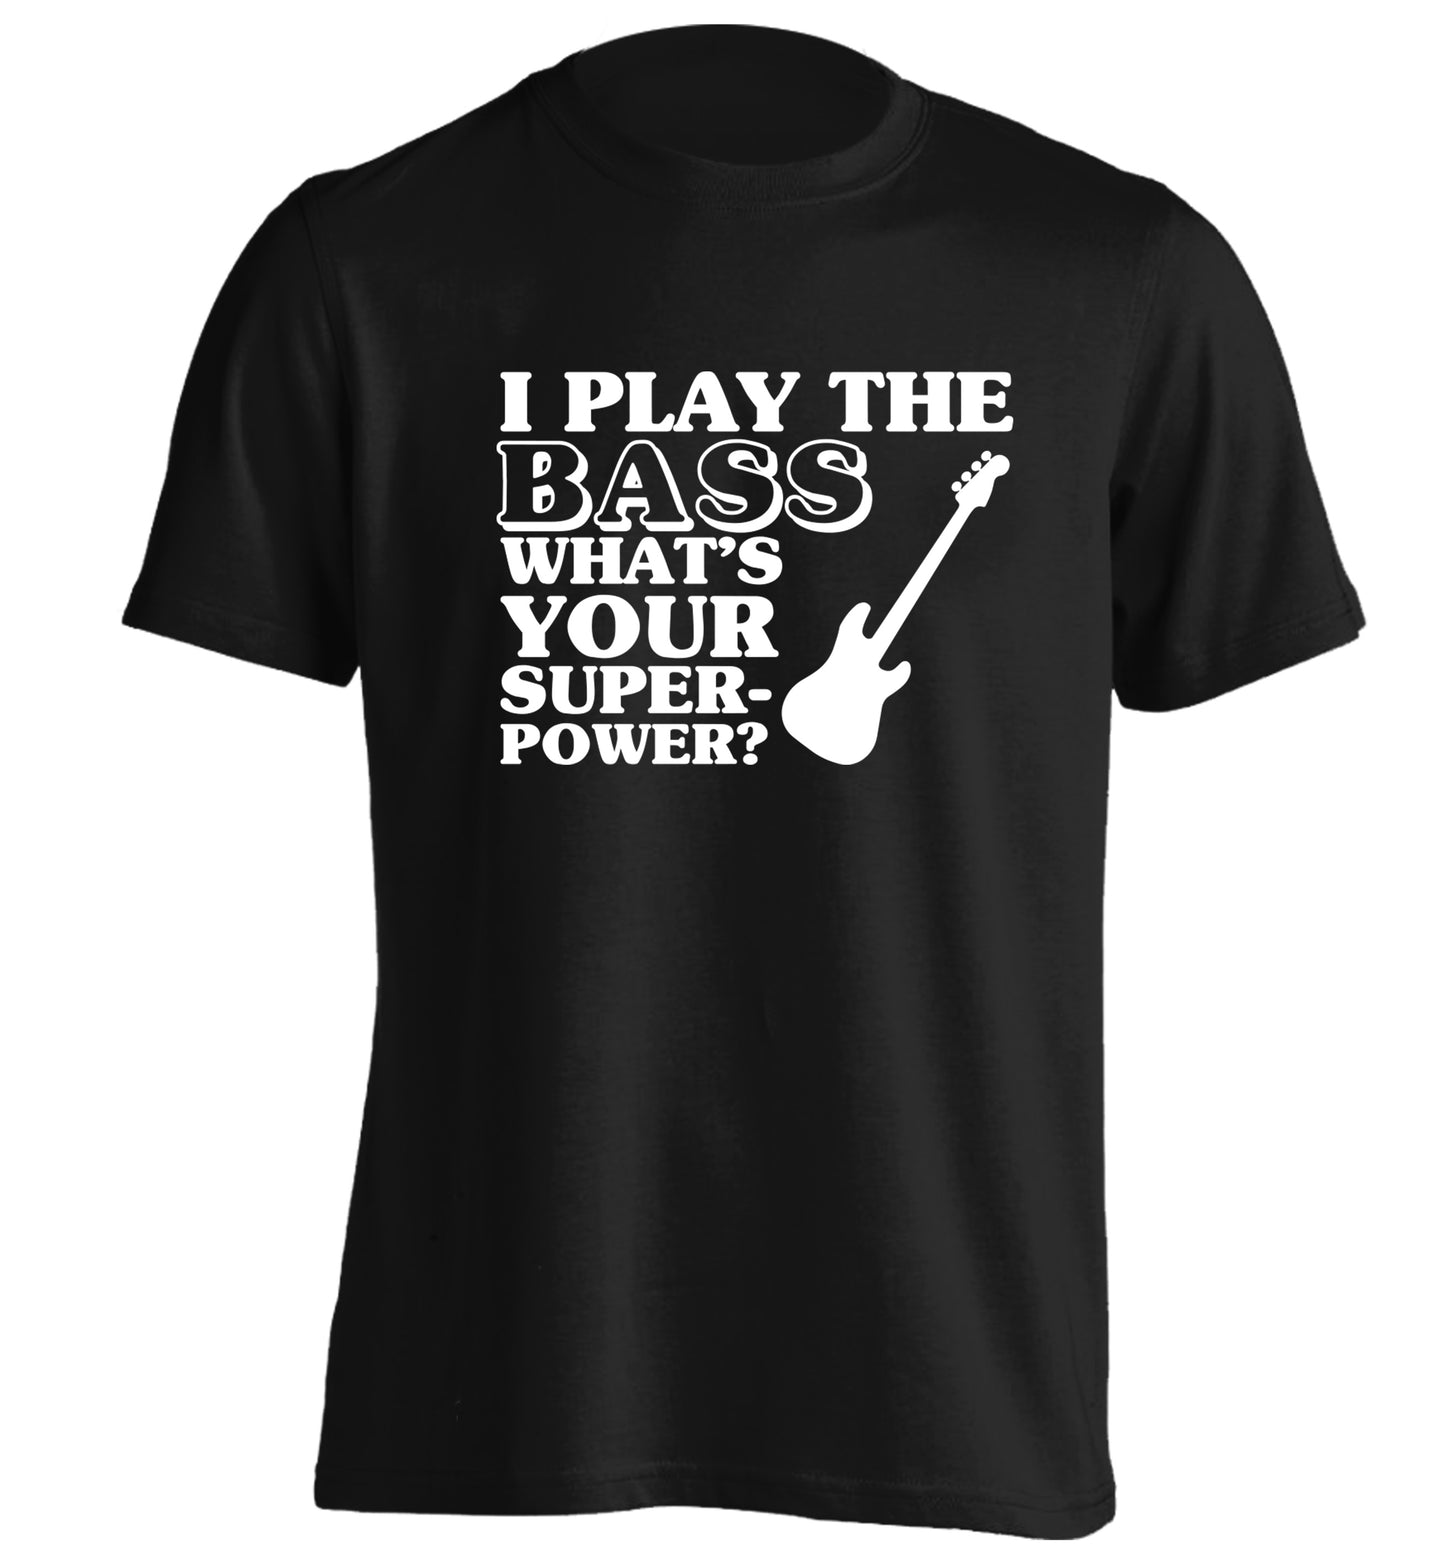 I play the bass what's your superpower? adults unisex black Tshirt 2XL